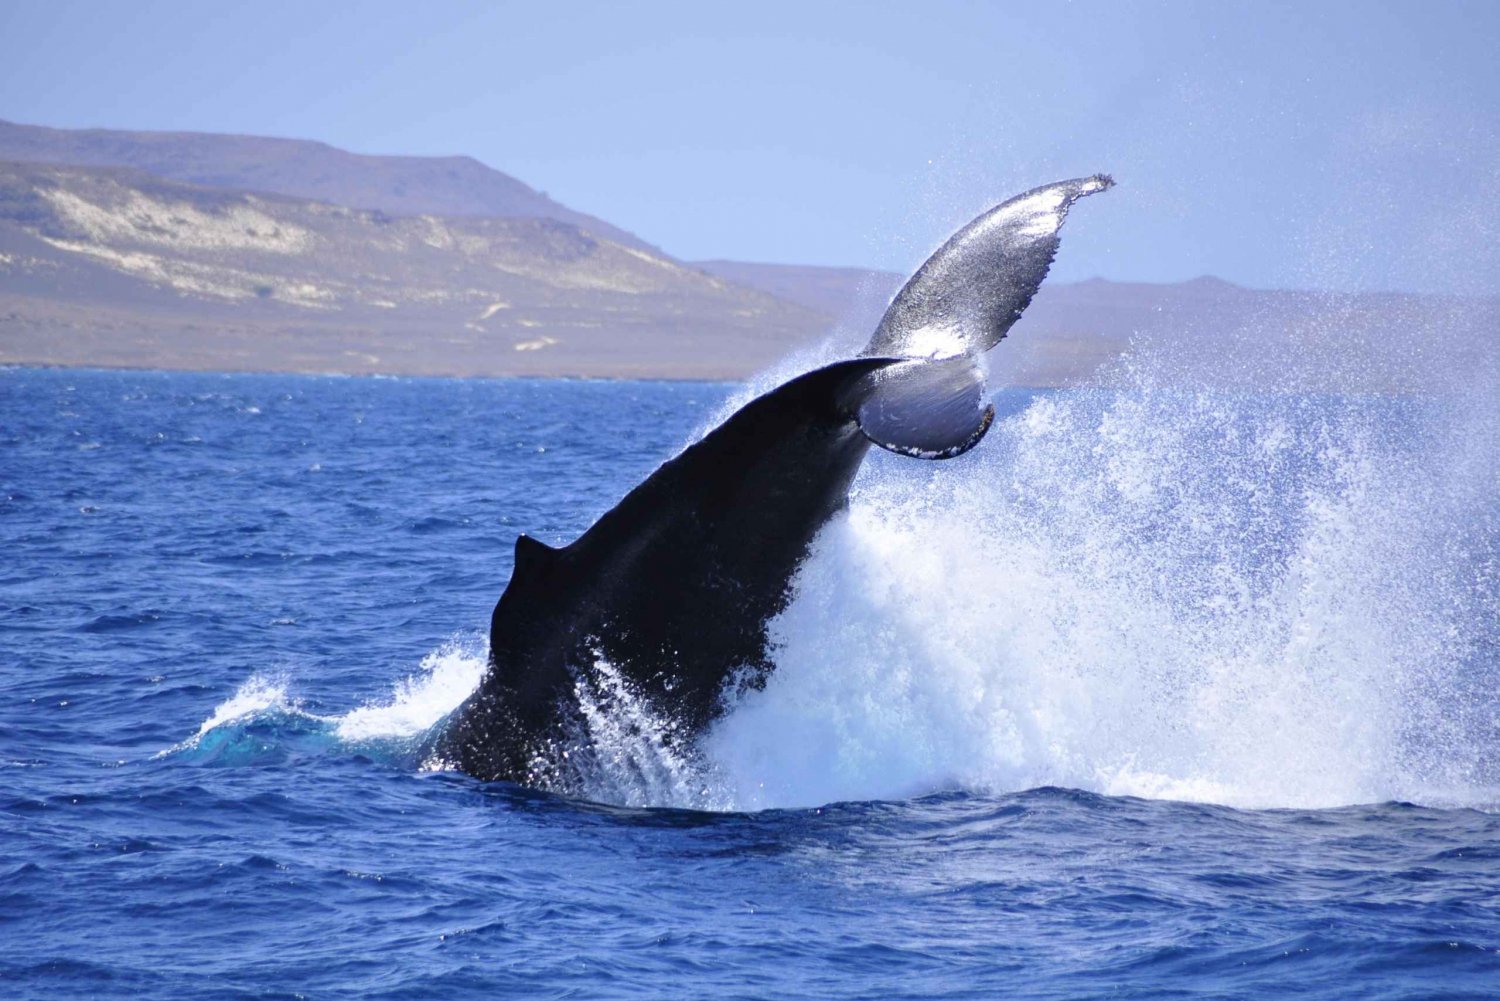 Boa Vista: Whale Watching Expedition